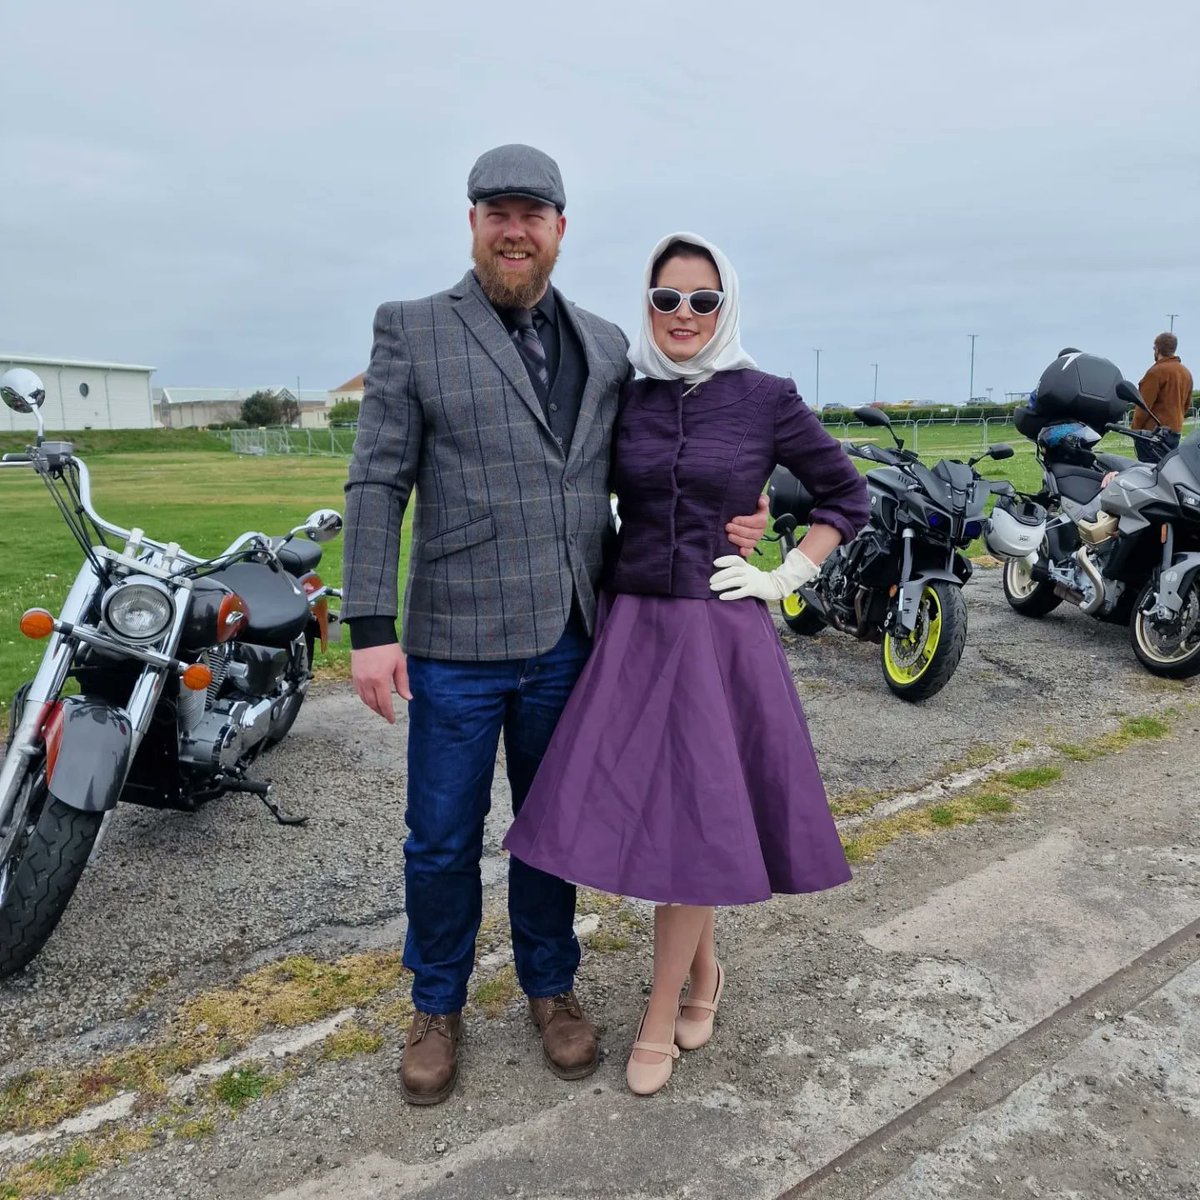 What an amazing day at the Aberdeen DGR. Managed to not get caught in anything or flash anyone and we raised over £14,000 for mens health. @gentlemansride #outandaboutscotland